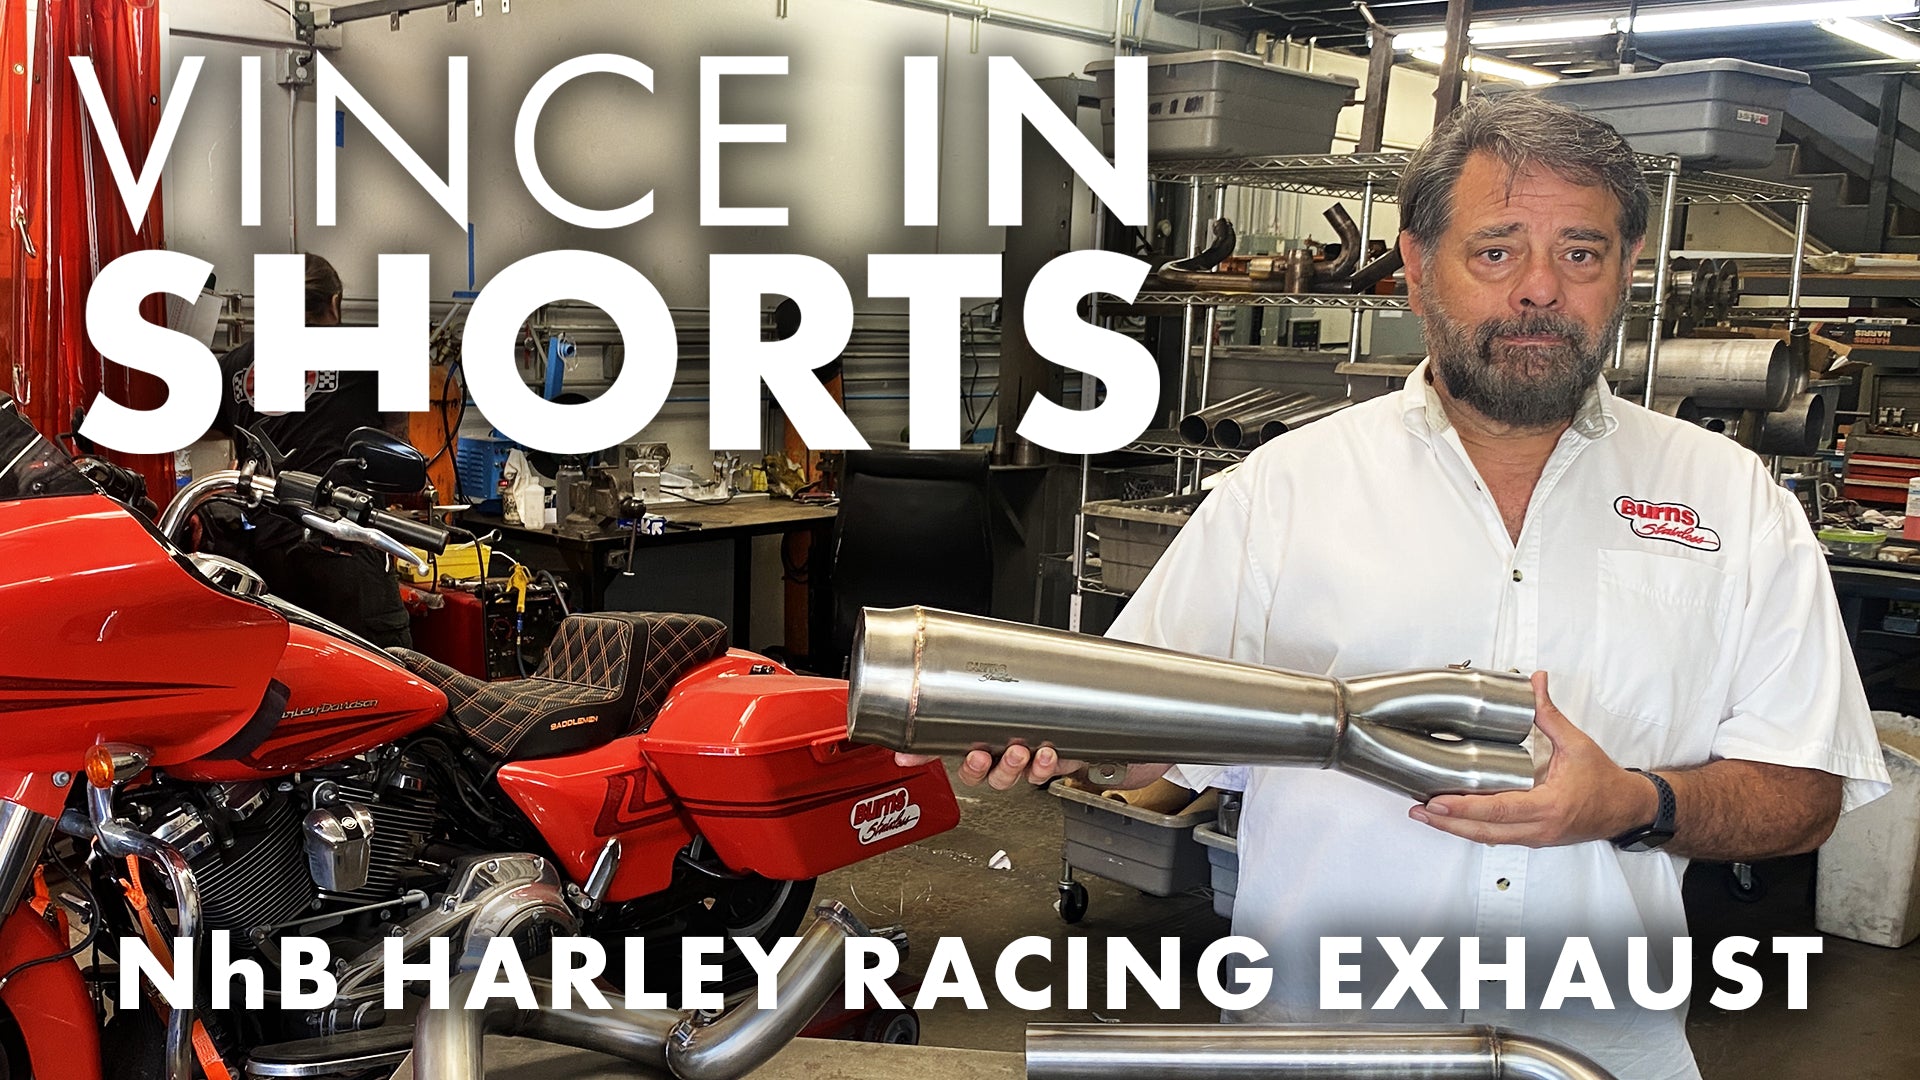 Vince in Shorts - Harley Racing Exhaust